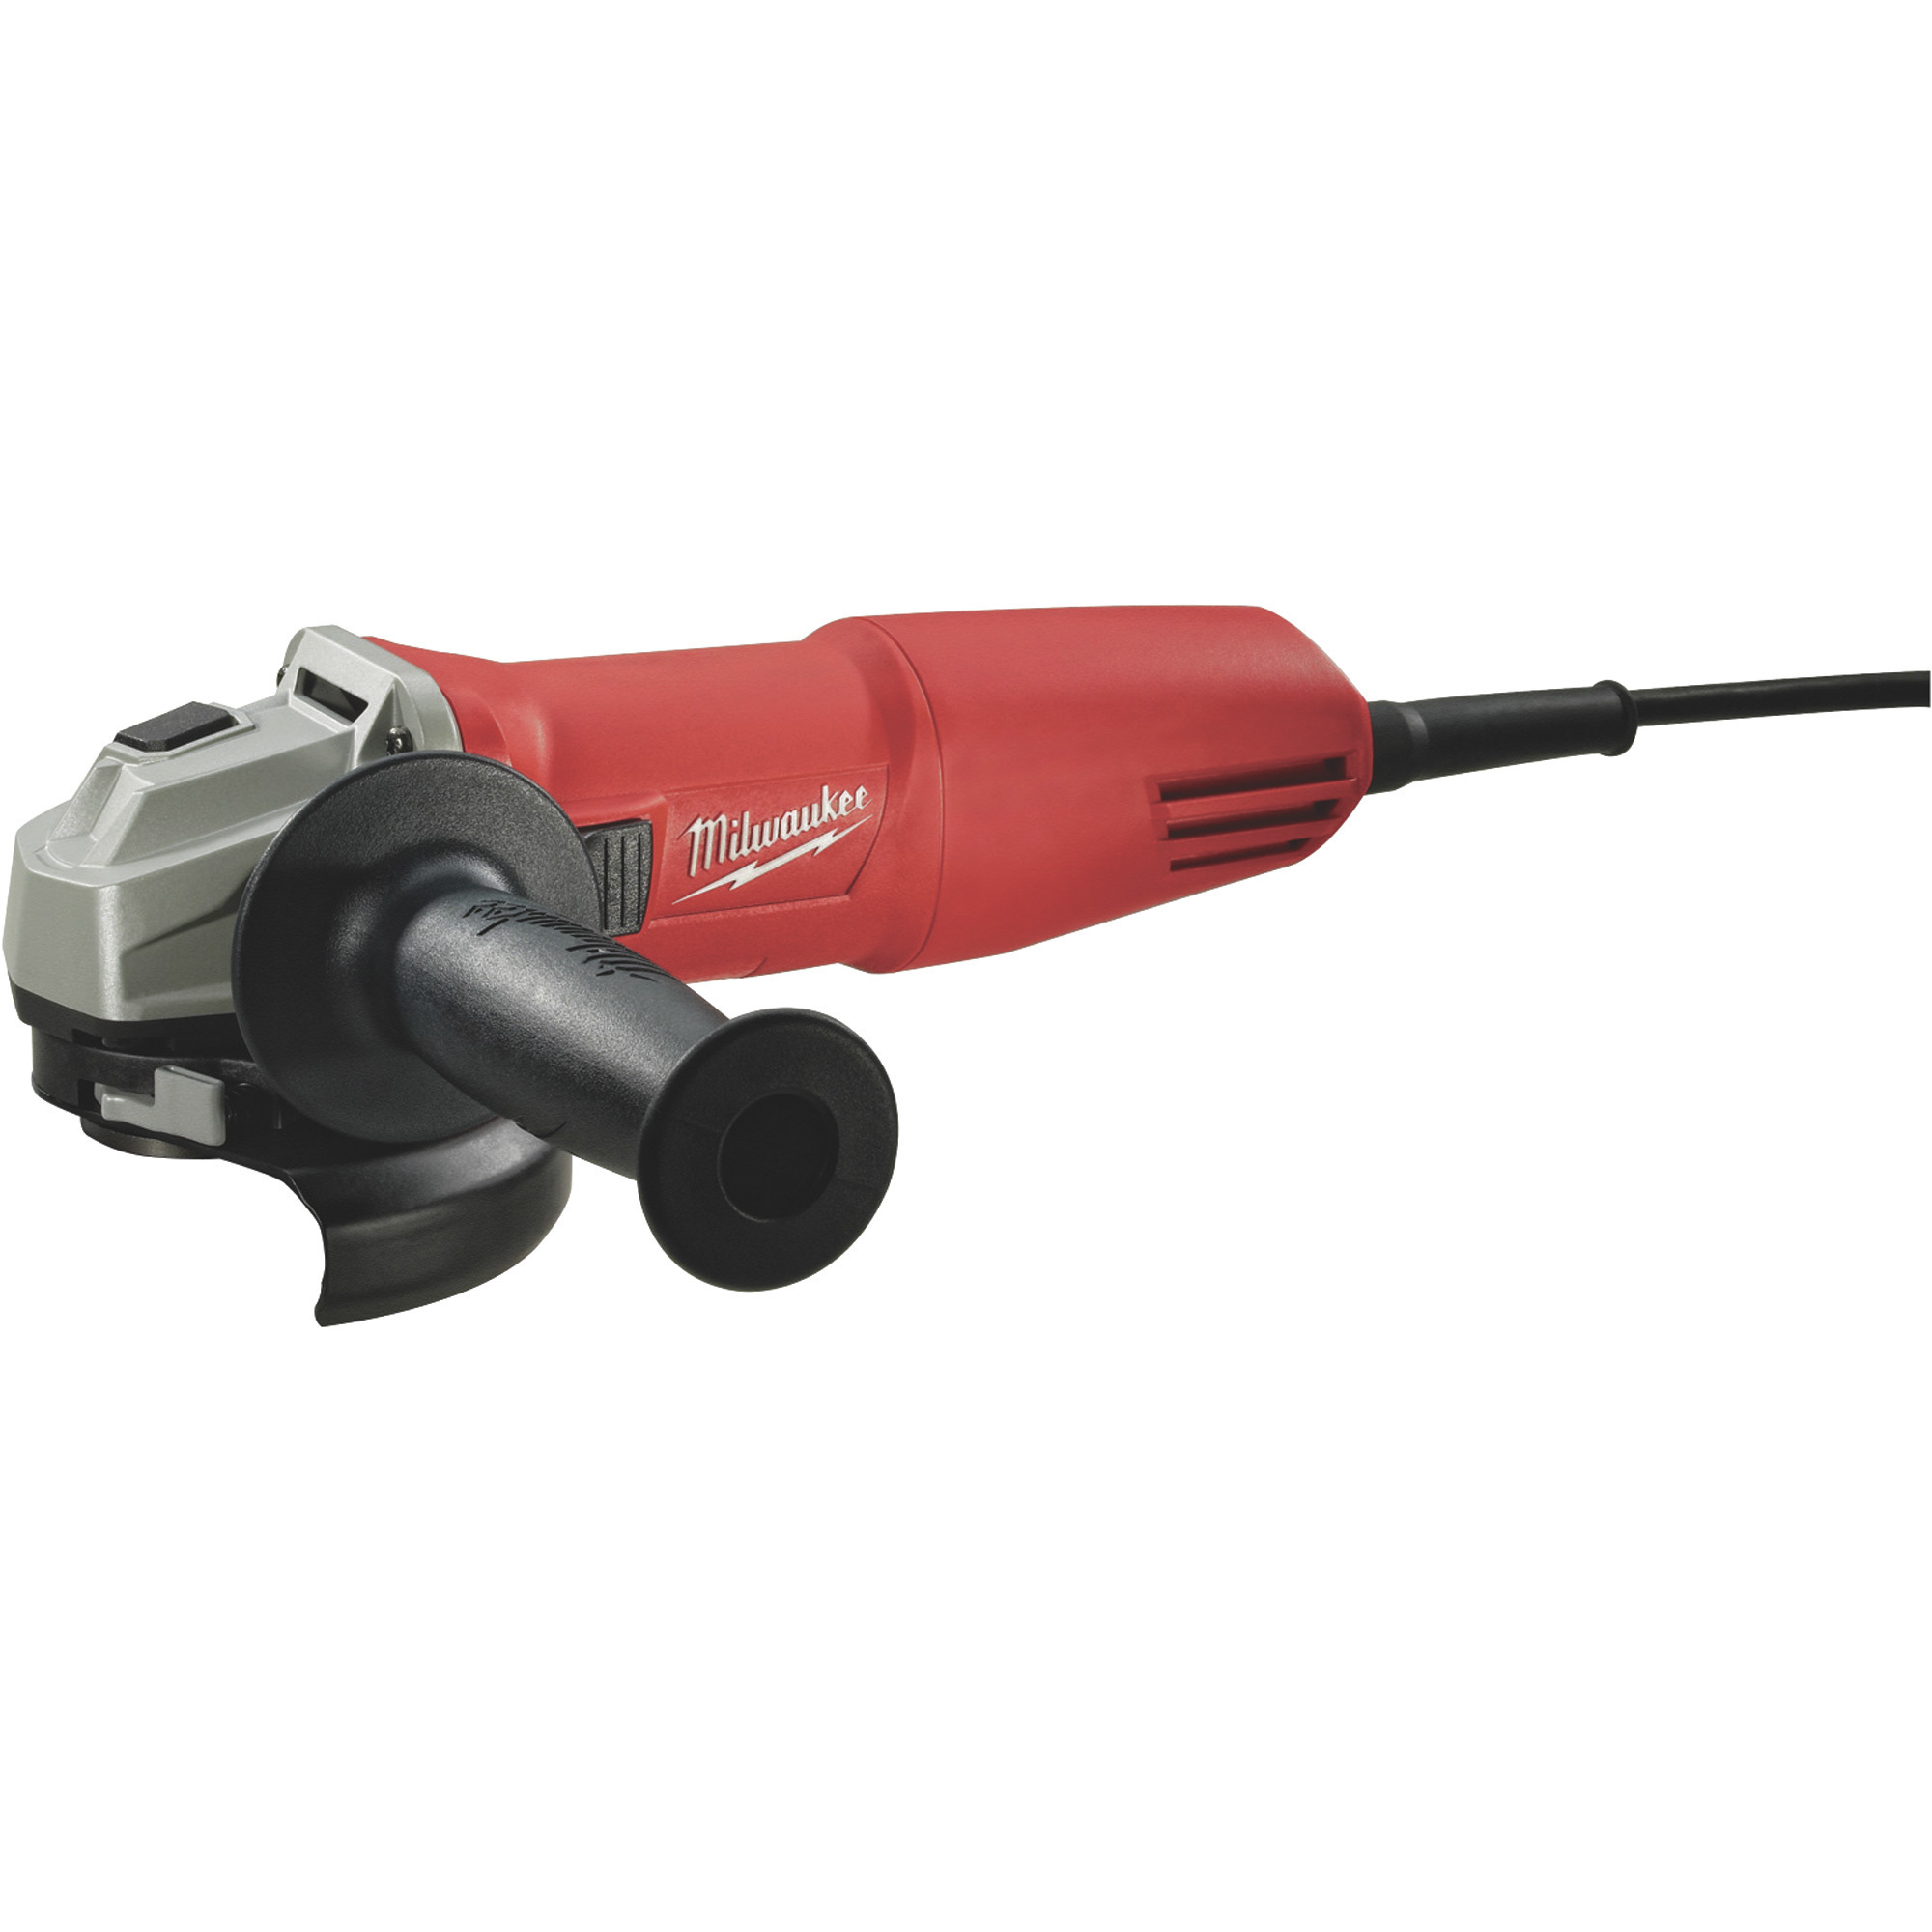 Bosch 4.5-in 8 Amps Sliding Switch Cordless Angle Grinder (Tool Only)